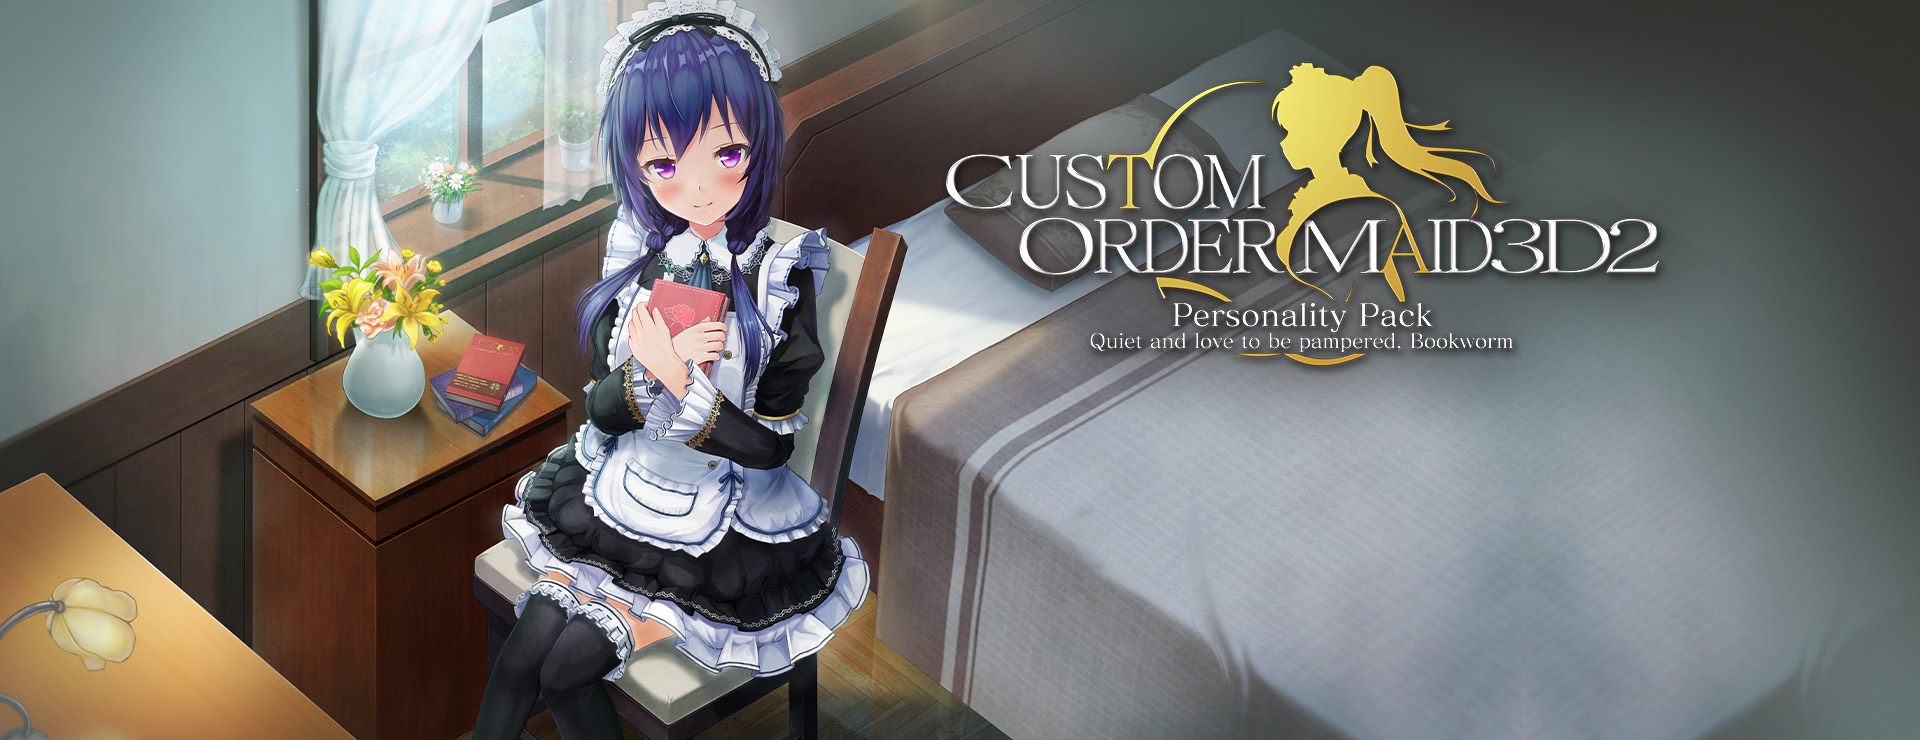 Custom Order Maid 3D2 - Quiet and Love to be Pampered Bookworm DLC - 仿真游戏 遊戲